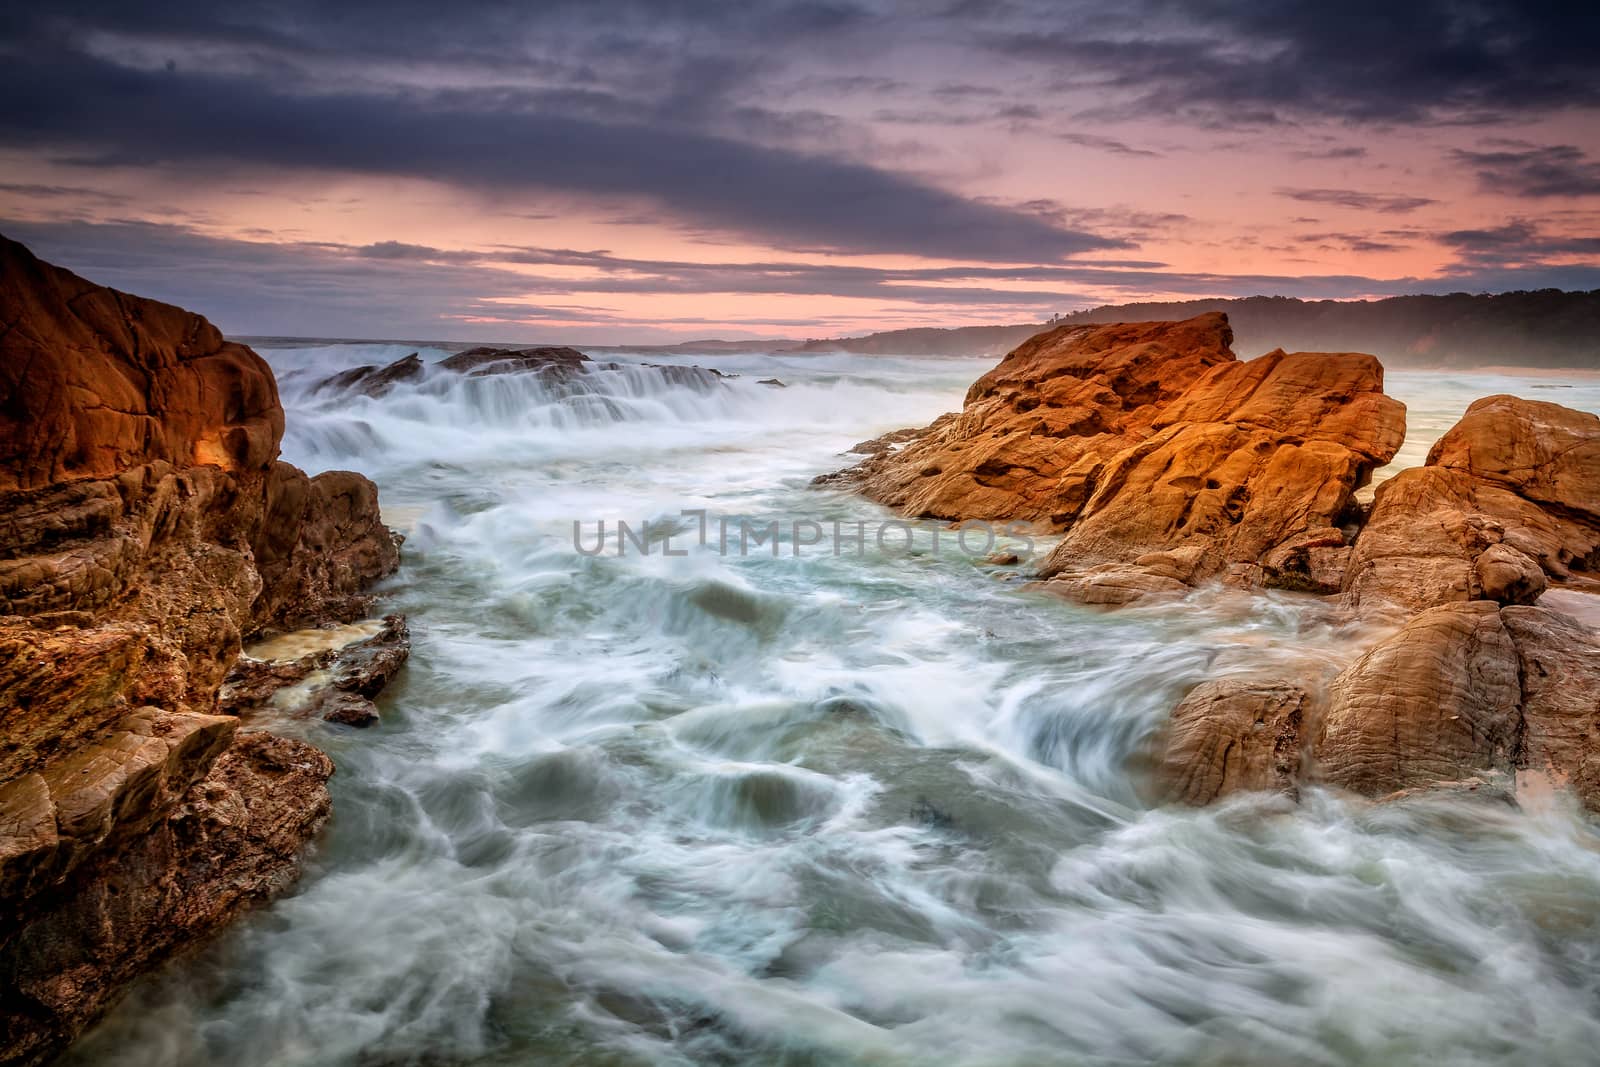 Bermagui rocky coastline a haven for fisherman and photographers who brave the conditions , views through the gully as waves cascade over rocks and surge forward with the incoming tide.